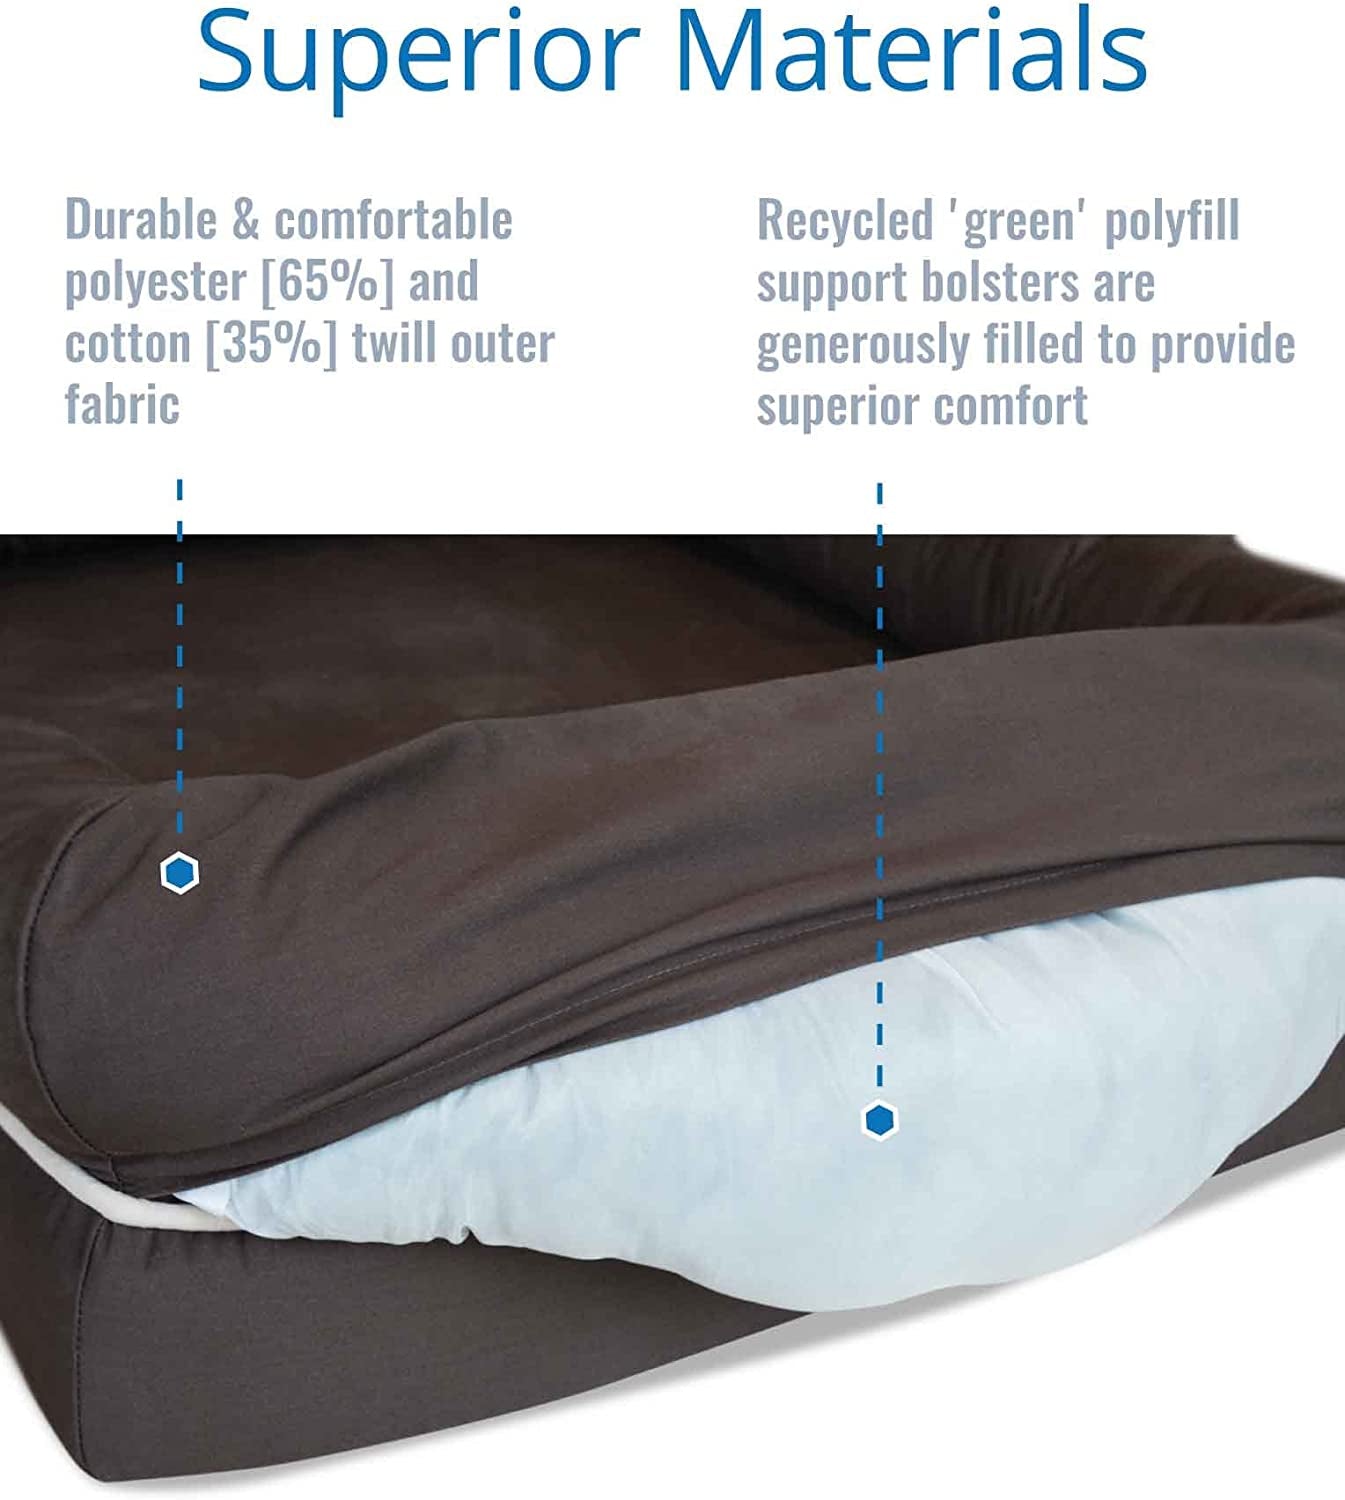 Ultimate Dog Bed, Orthopedic Memory Foam, Multiple Sizes and Colors, Medium Firmness Pillow, Waterproof Liner, YKK Zippers, Breathable 35% Cotton Cover